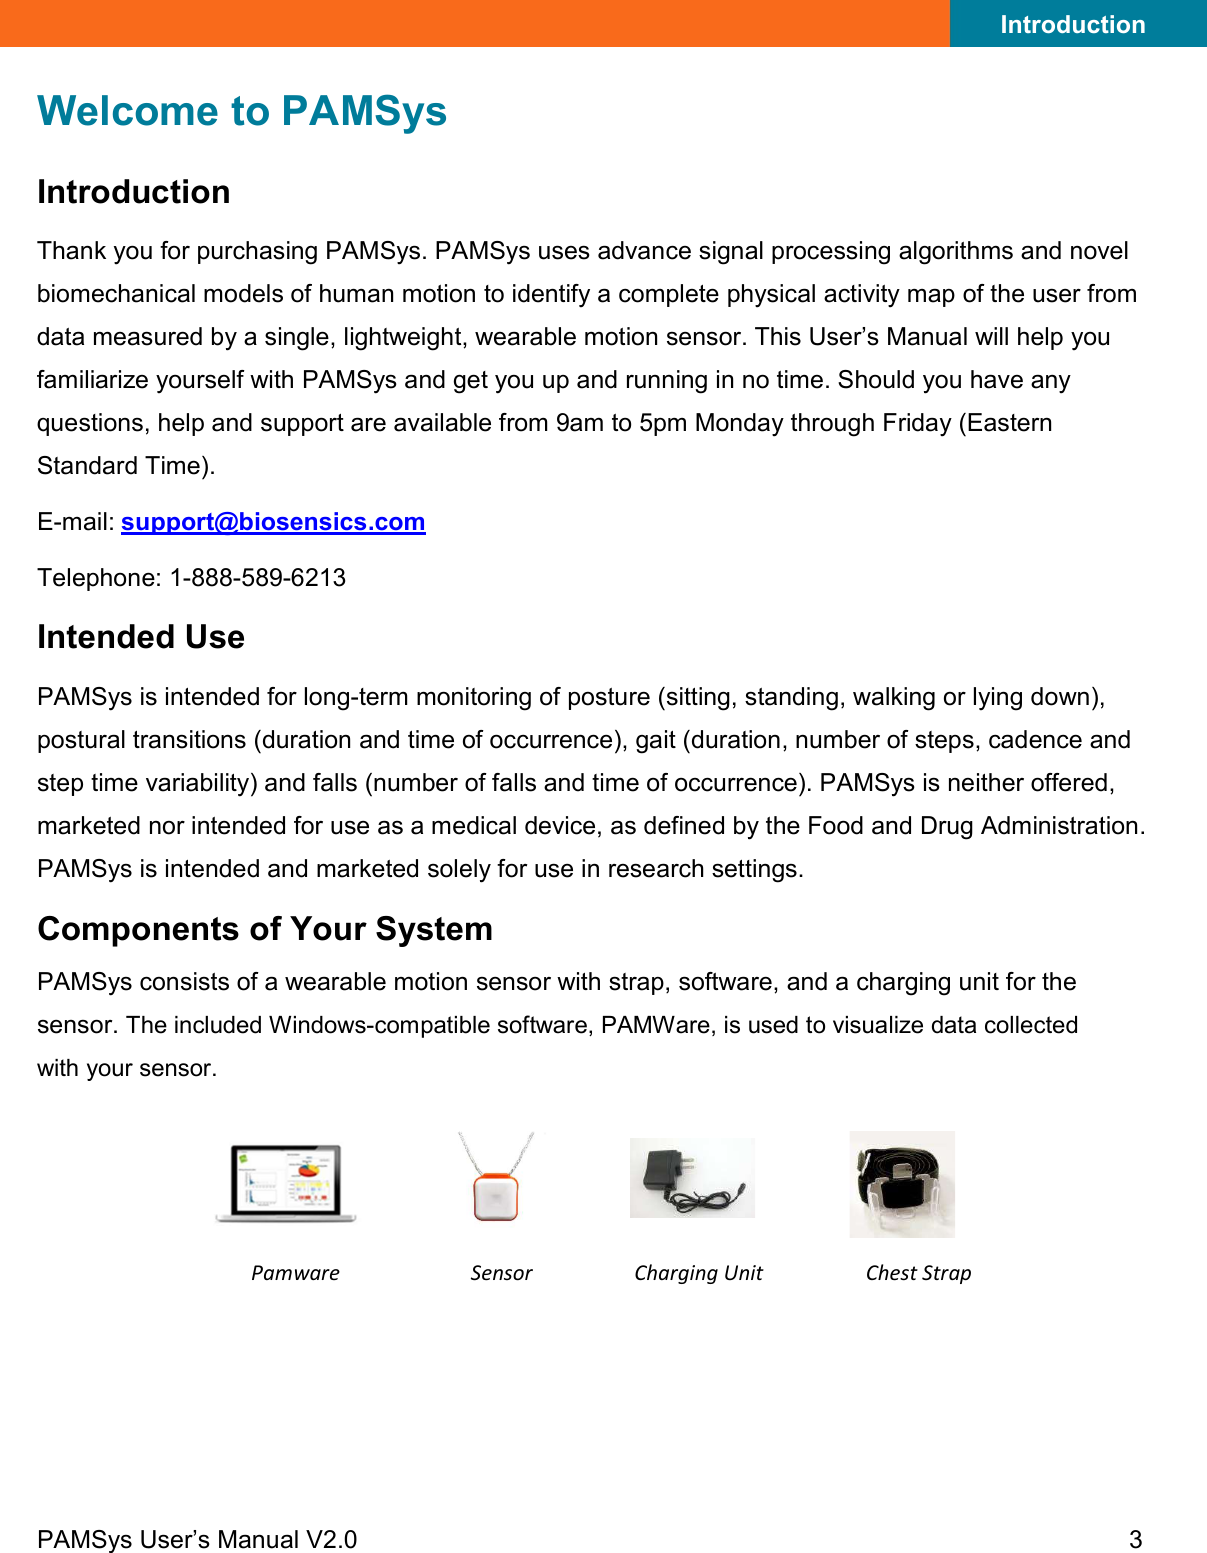 Introduction PAMSys User’s Manual V2.0 3    Welcome to PAMSys Introduction Thank you for purchasing PAMSys. PAMSys uses advance signal processing algorithms and novel biomechanical models of human motion to identify a complete physical activity map of the user from data measured by a single, lightweight, wearable motion sensor. This User’s Manual will help you familiarize yourself with PAMSys and get you up and running in no time. Should you have any questions, help and support are available from 9am to 5pm Monday through Friday (Eastern Standard Time). E- mail: support@biosensics.com  Telephone: 1-888-589-6213  Intended Use PAMSys is intended for long-term monitoring of posture (sitting, standing, walking or lying down), postural transitions (duration and time of occurrence), gait (duration, number of steps, cadence and step time variability) and falls (number of falls and time of occurrence). PAMSys is neither offered, marketed nor intended for use as a medical device, as defined by the Food and Drug Administration. PAMSys is intended and marketed solely for use in research settings. Components of Your System PAMSys consists of a wearable motion sensor with strap, software, and a charging unit for the sensor. The included Windows-compatible software, PAMWare, is used to visualize data collected with your sensor.     Pamware Sensor Charging Unit Chest Strap     